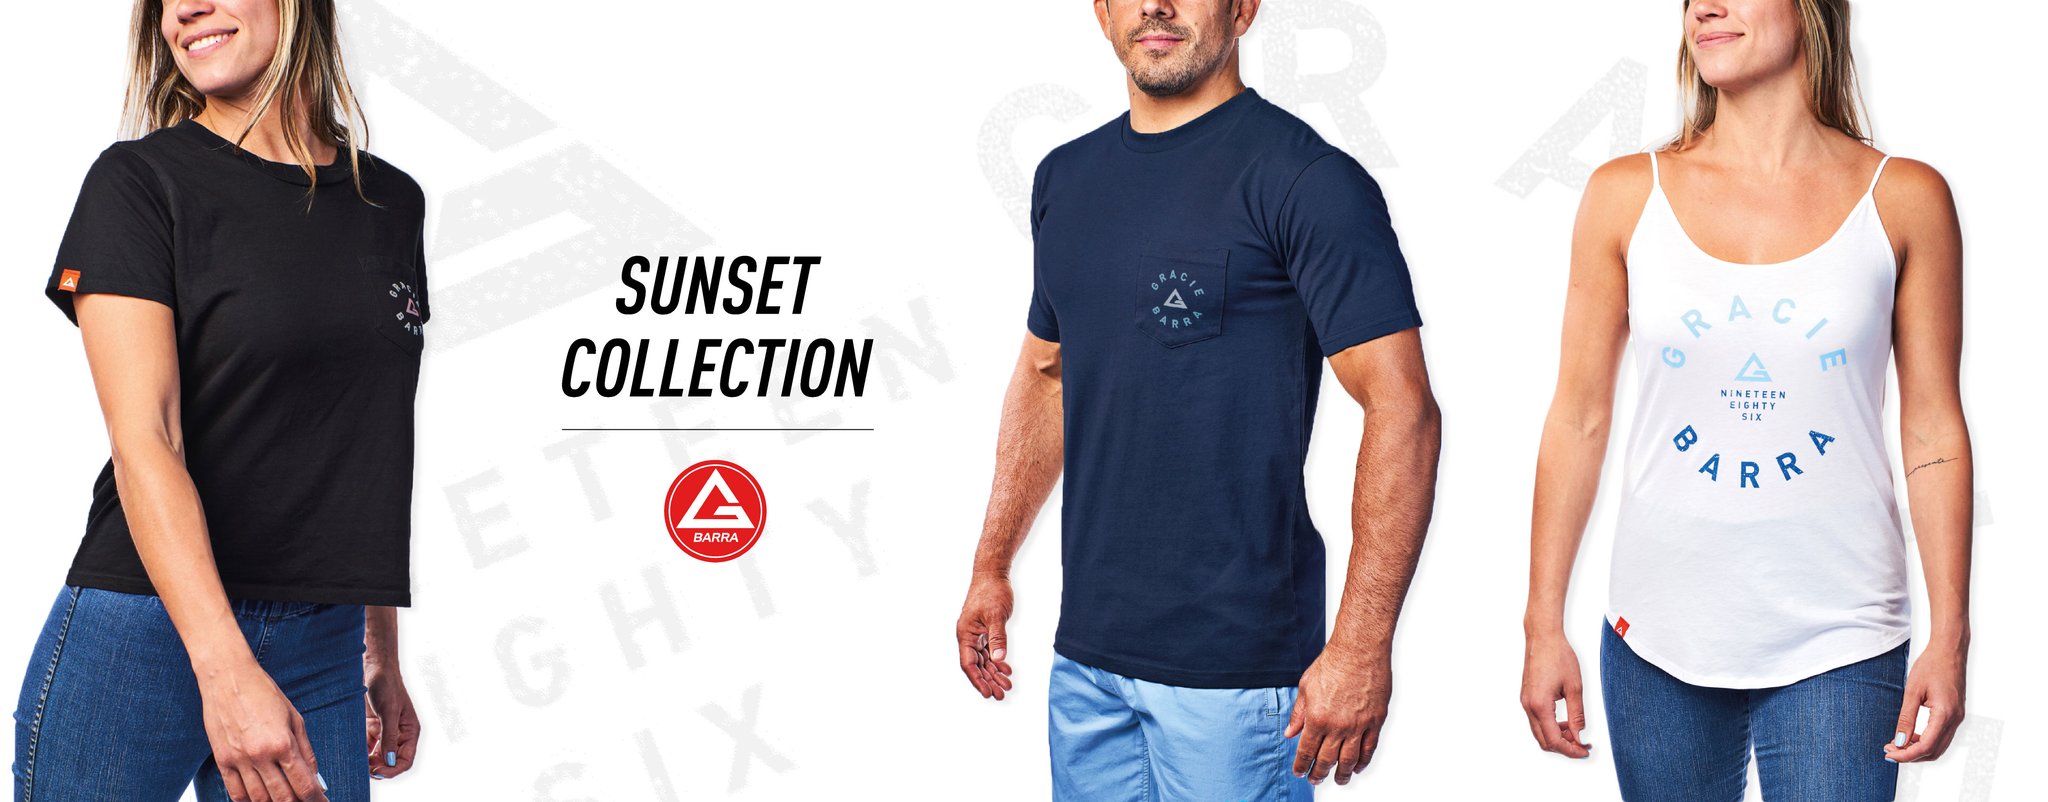 SUNSET COLLECTION